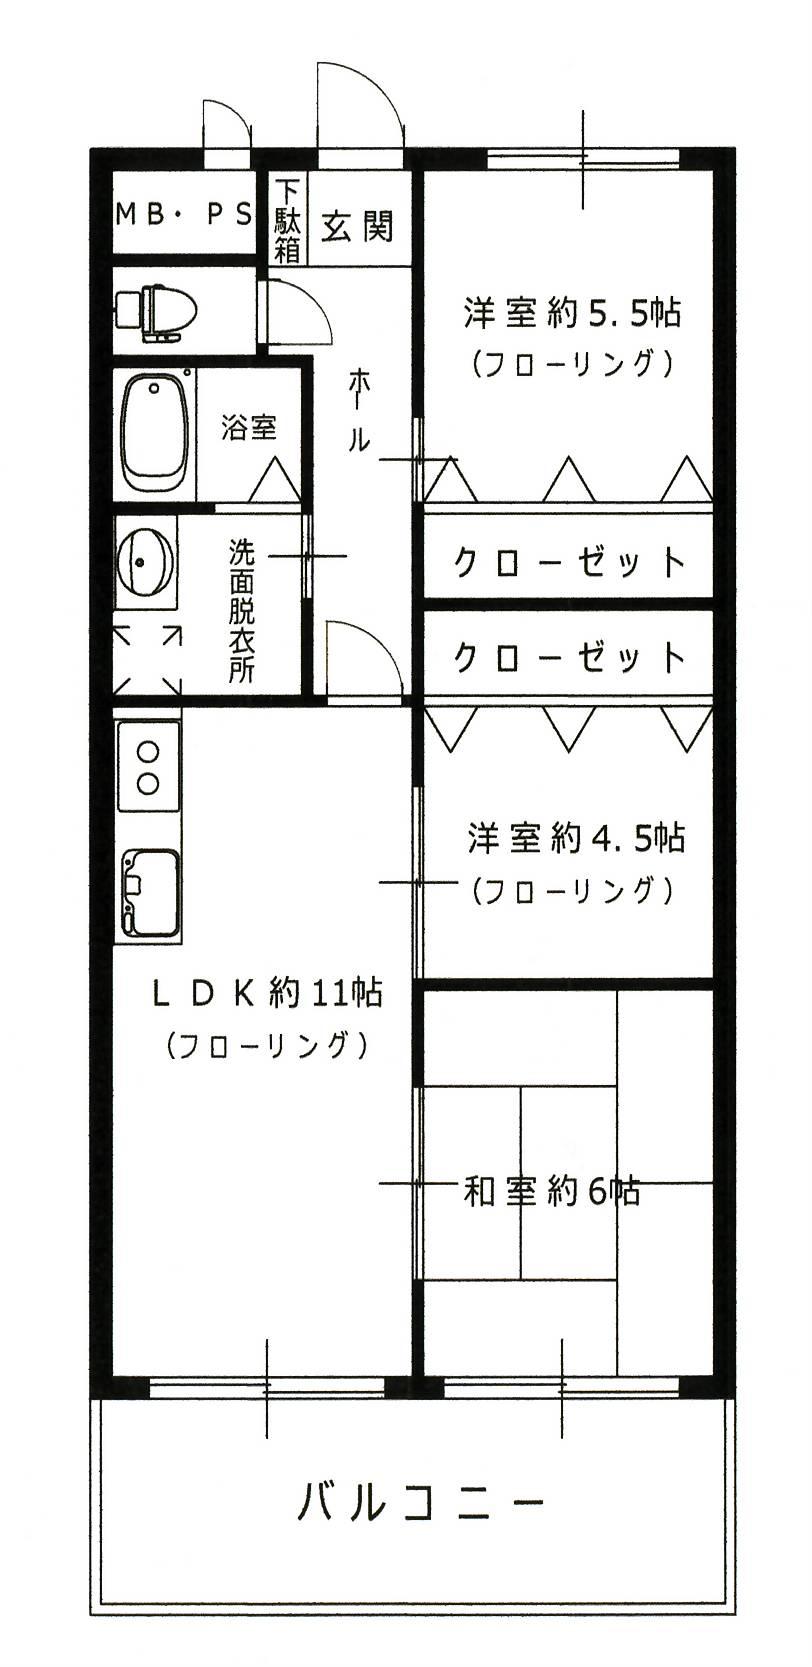 Floor plan. 3LDK, Price 9.5 million yen, Footprint 63 sq m , Balcony area 8.37 sq m is a renovation scheduled for completion. For more information please contact us.